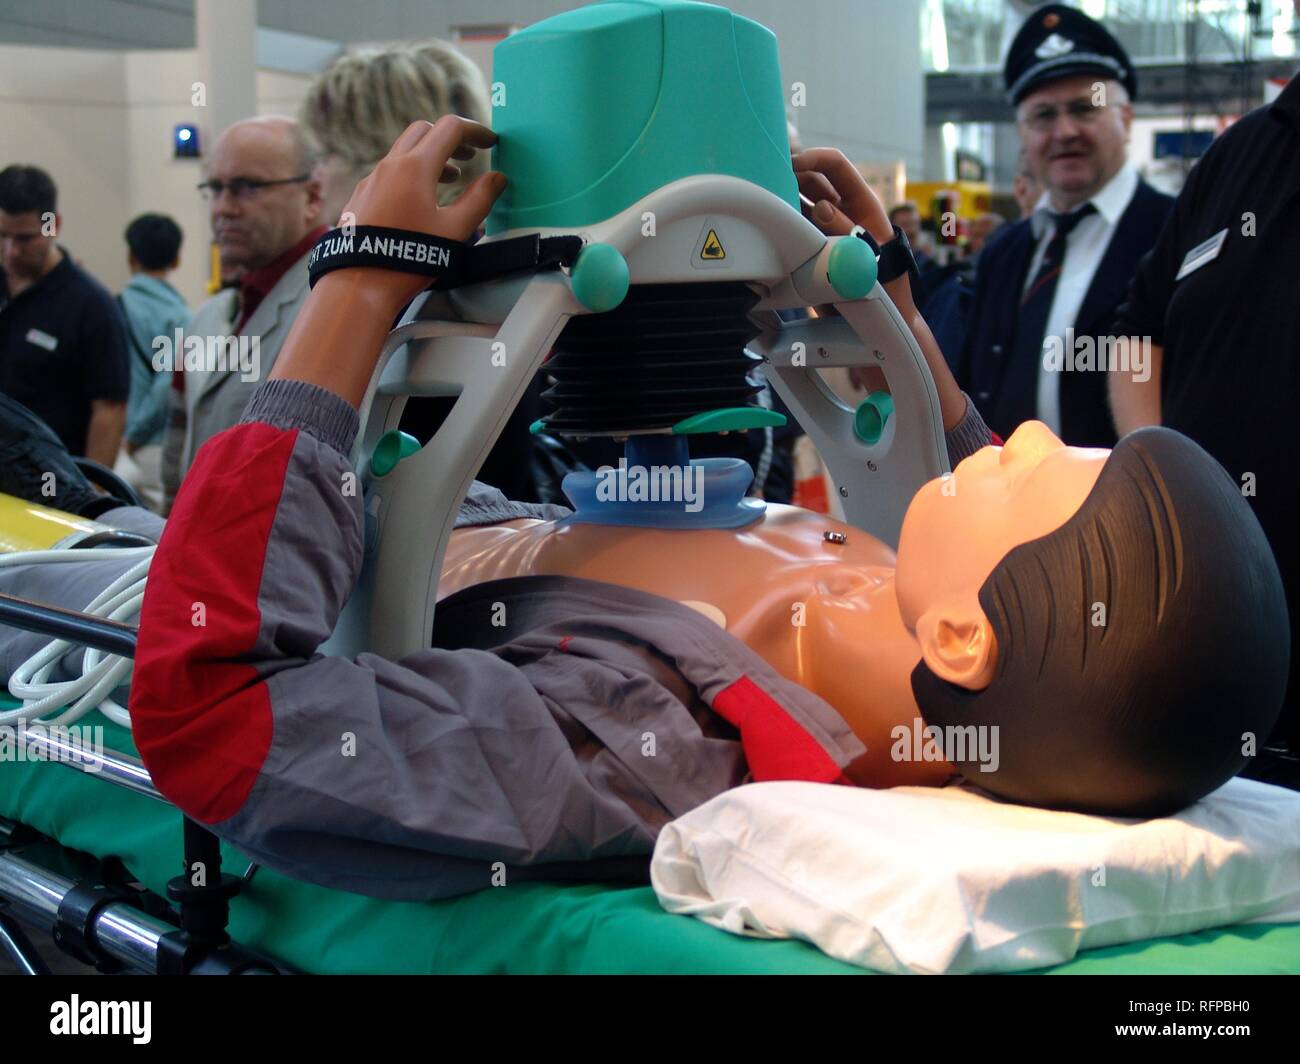 DEU, Federal Republic of Germany, Hannover : Mashine for Thorax compression during a cardiac arrest, for emergency services. Stock Photo